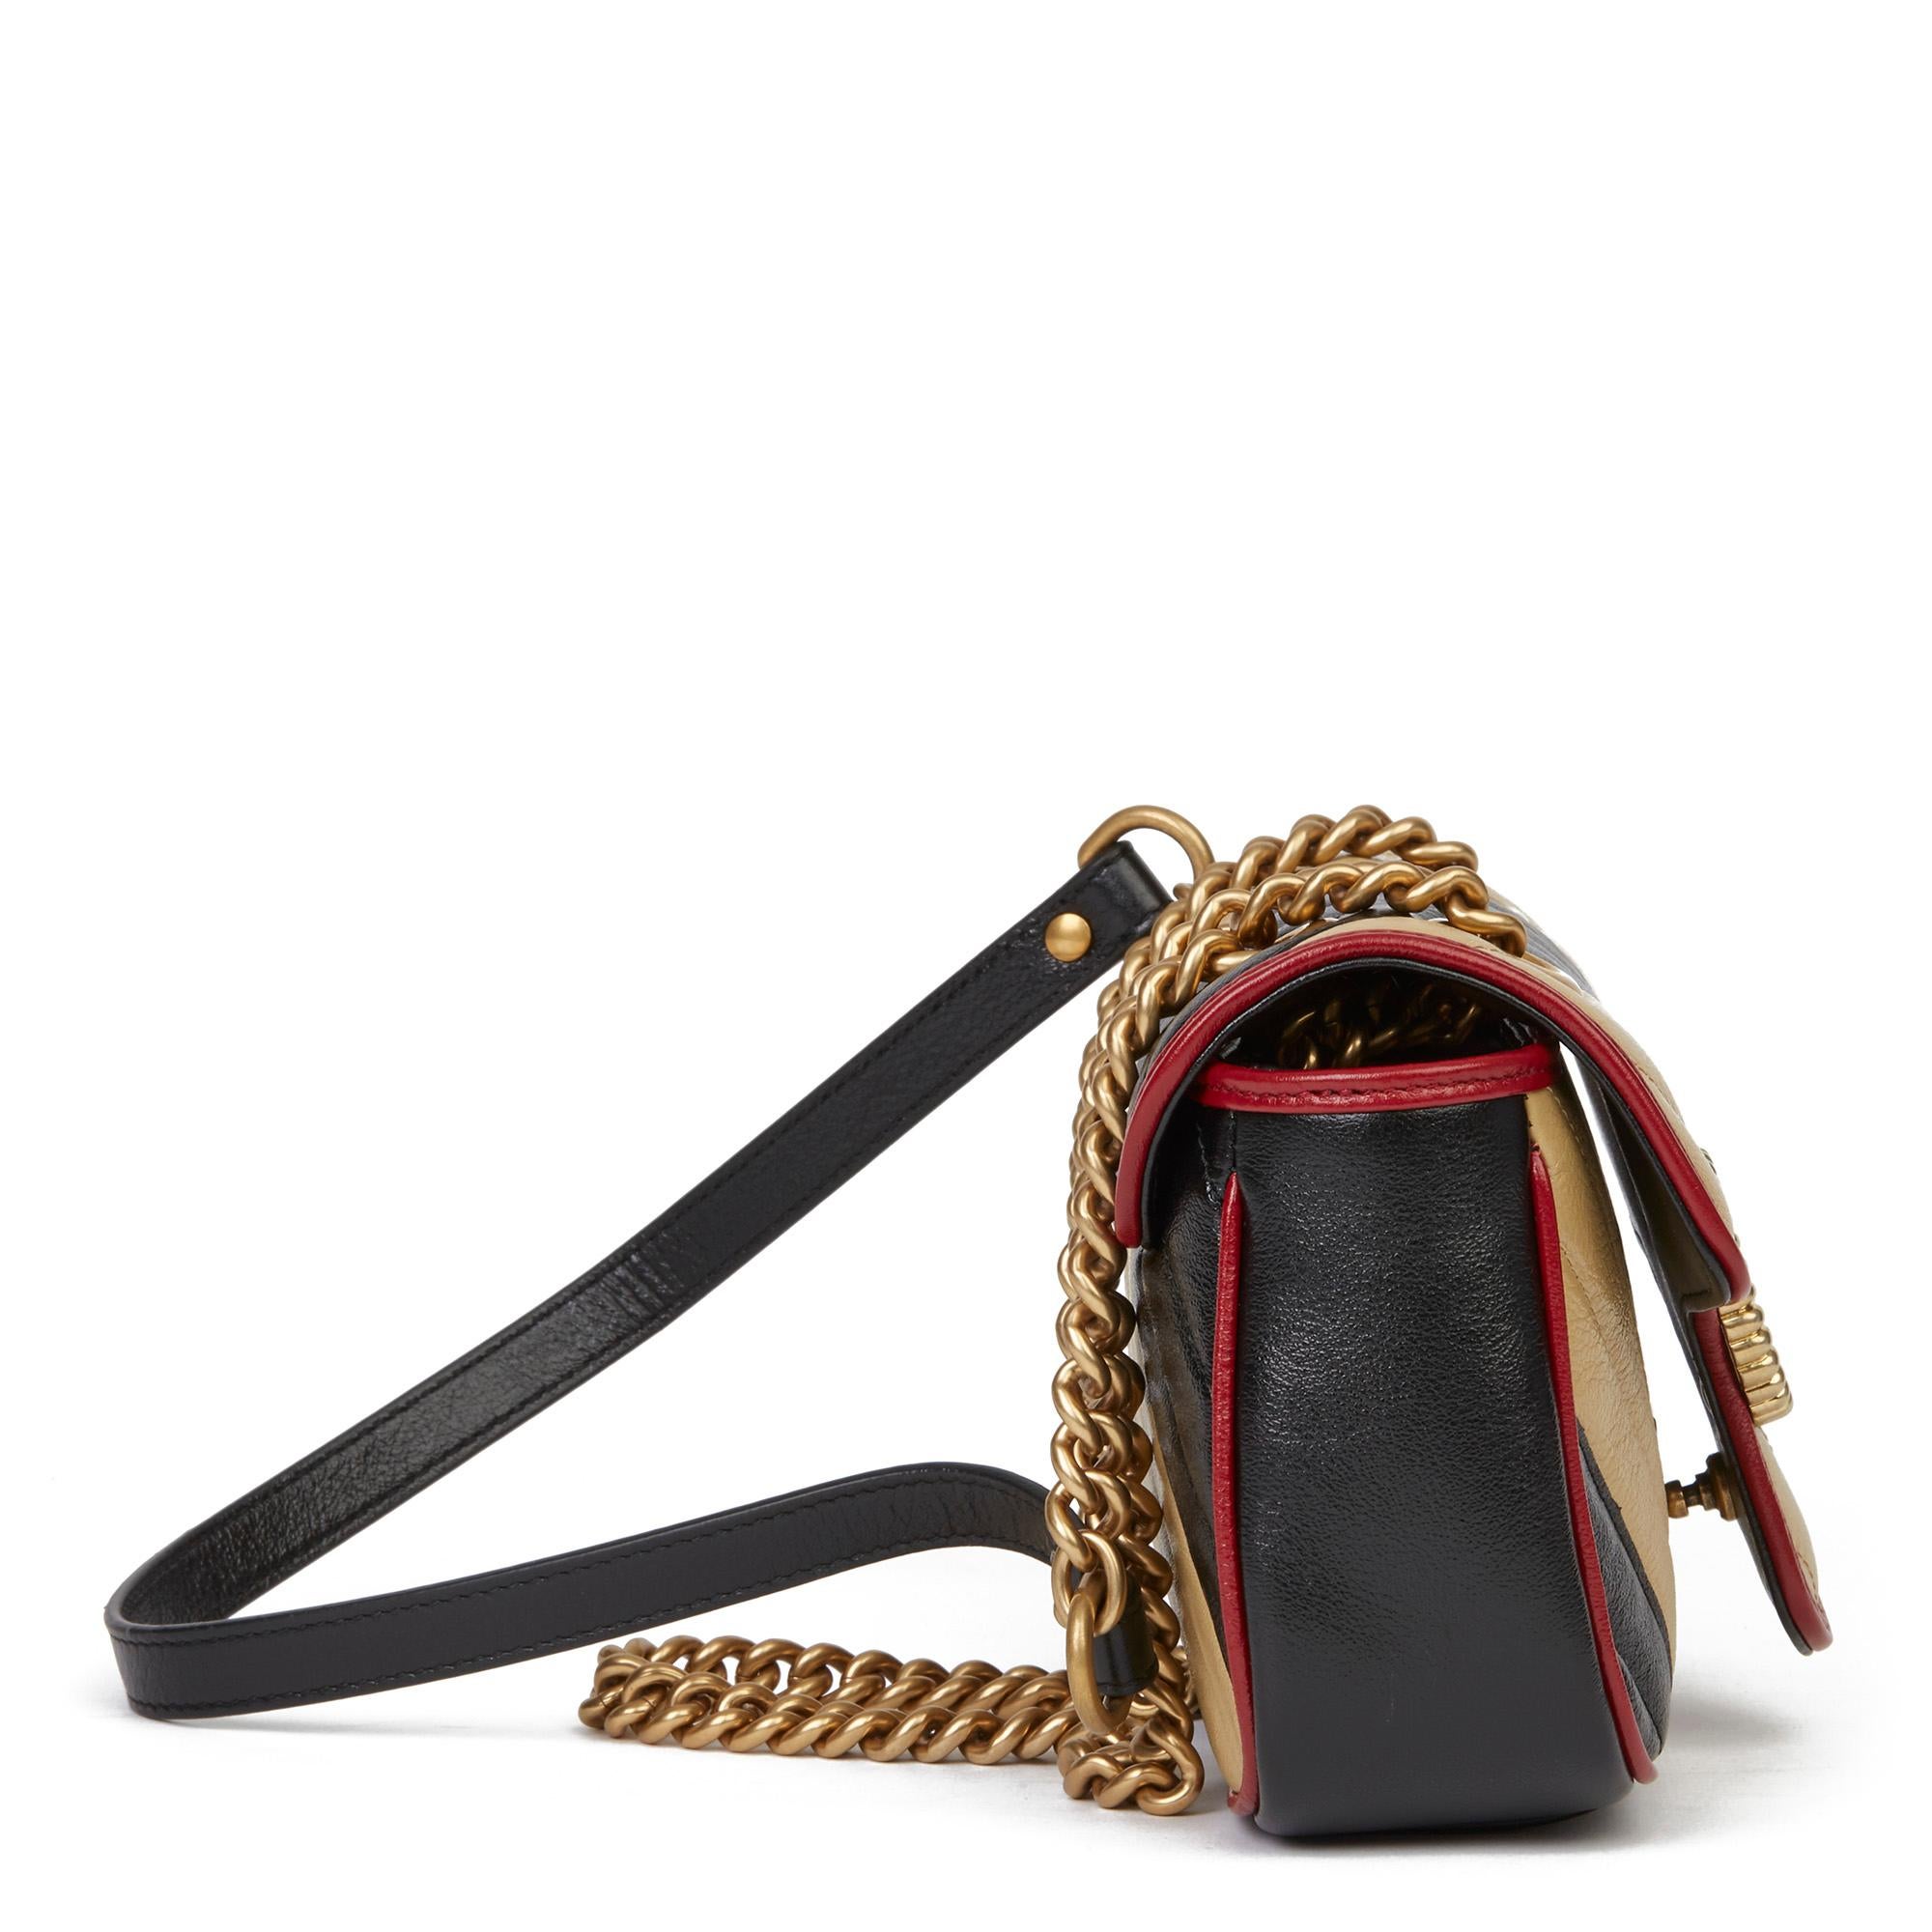 GUCCI
Black, Cream & Red Diagonal Quilted Aged Calfskin Leather Mini Marmont

Xupes Reference: HB3535
Serial Number: 446744 493075
Age (Circa): 2020
Accompanied By: Gucci Dust Bag, Care Booklet
Authenticity Details: Serial Stamp (Made in